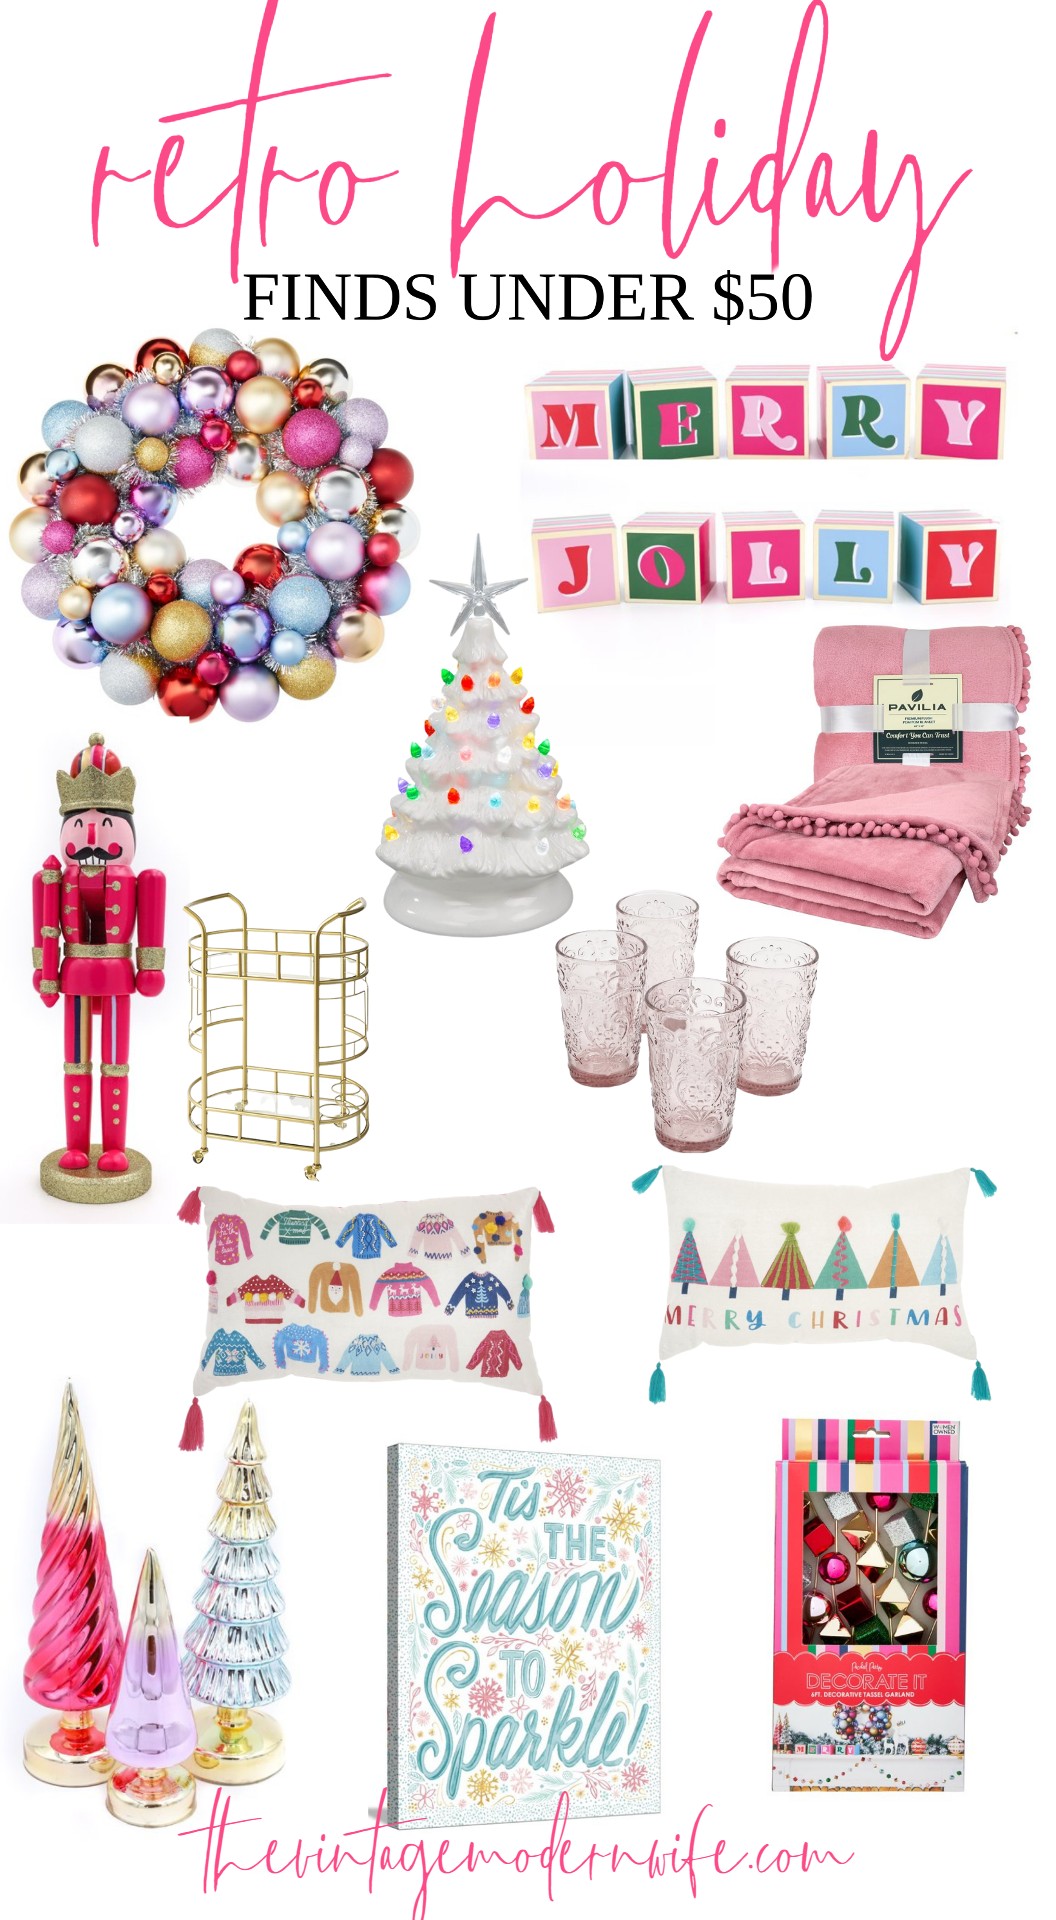 Adorable retro holiday finds from Walmart! I'm loving all the cute stuff they have this year!